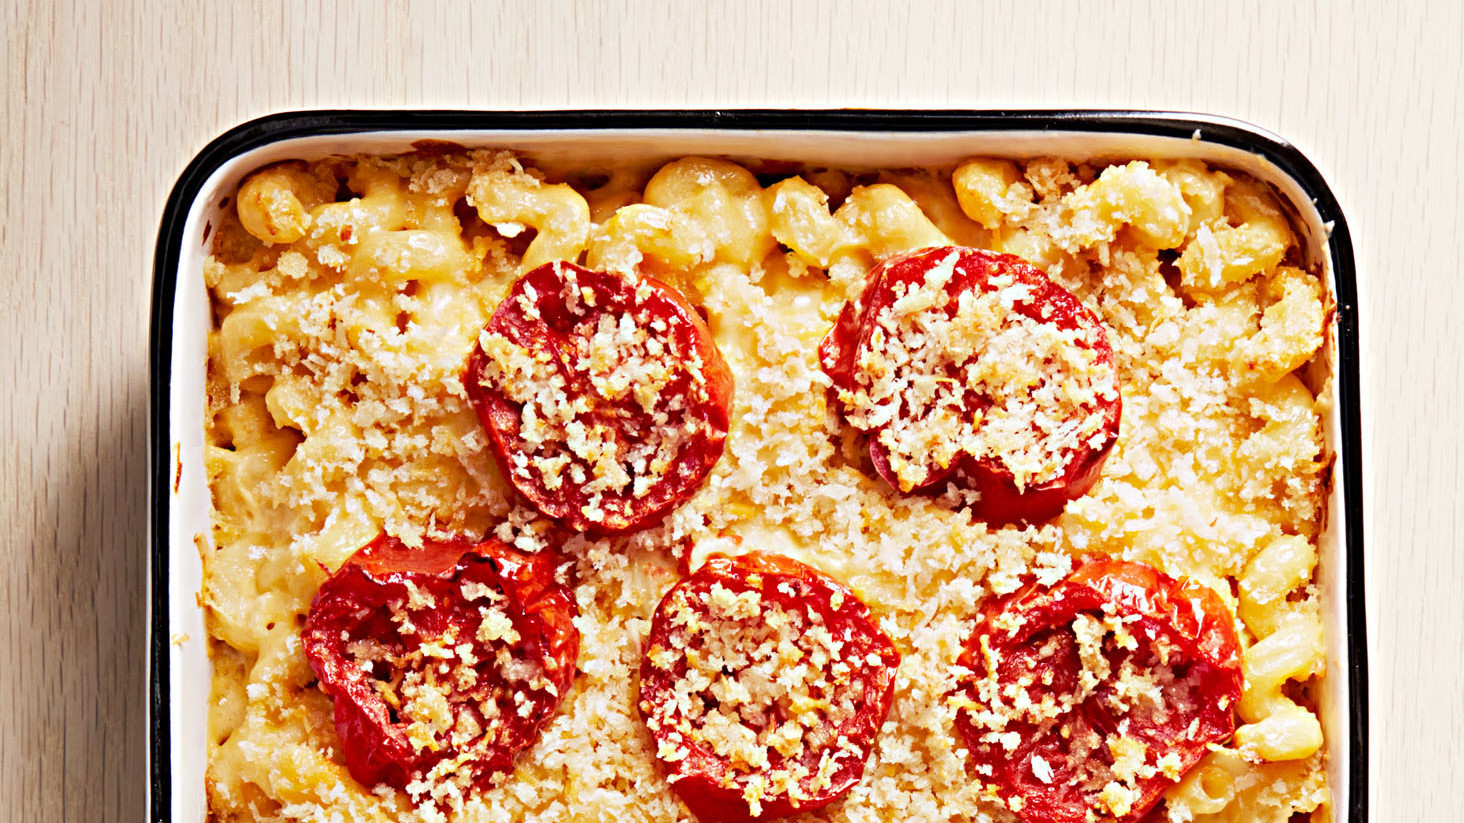 Baked Macaroni And Cheese With Tomatoes And Breadcrumbs
 Baked Mac and Cheese with Broiled Tomatoes